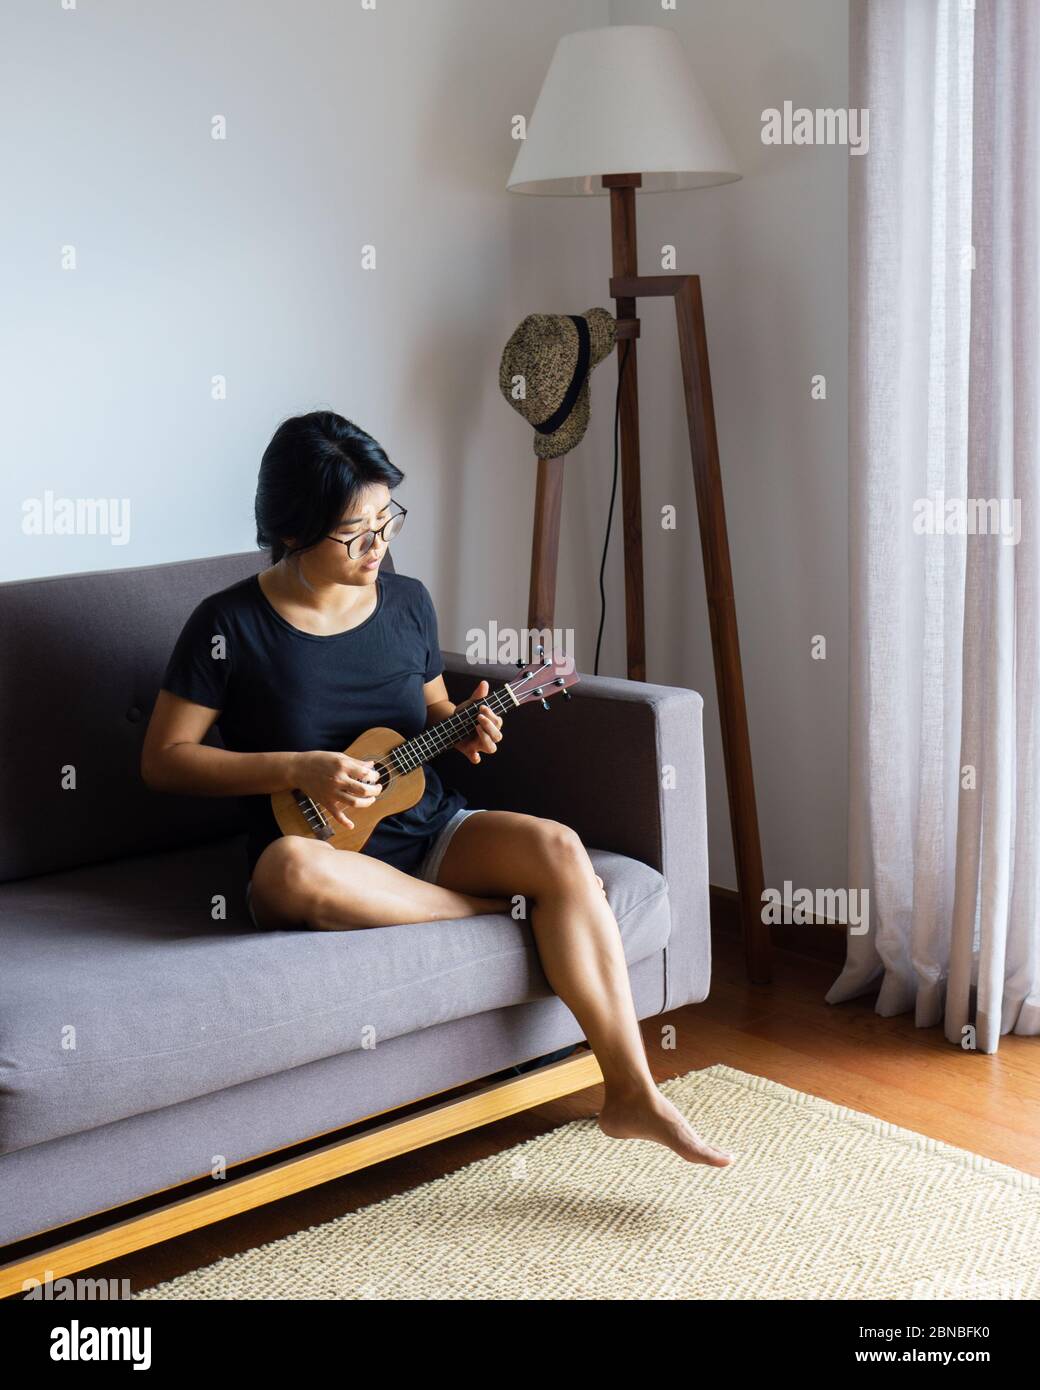 Young women playing the ukulele inside a home on a couch in the living room Stock Photo